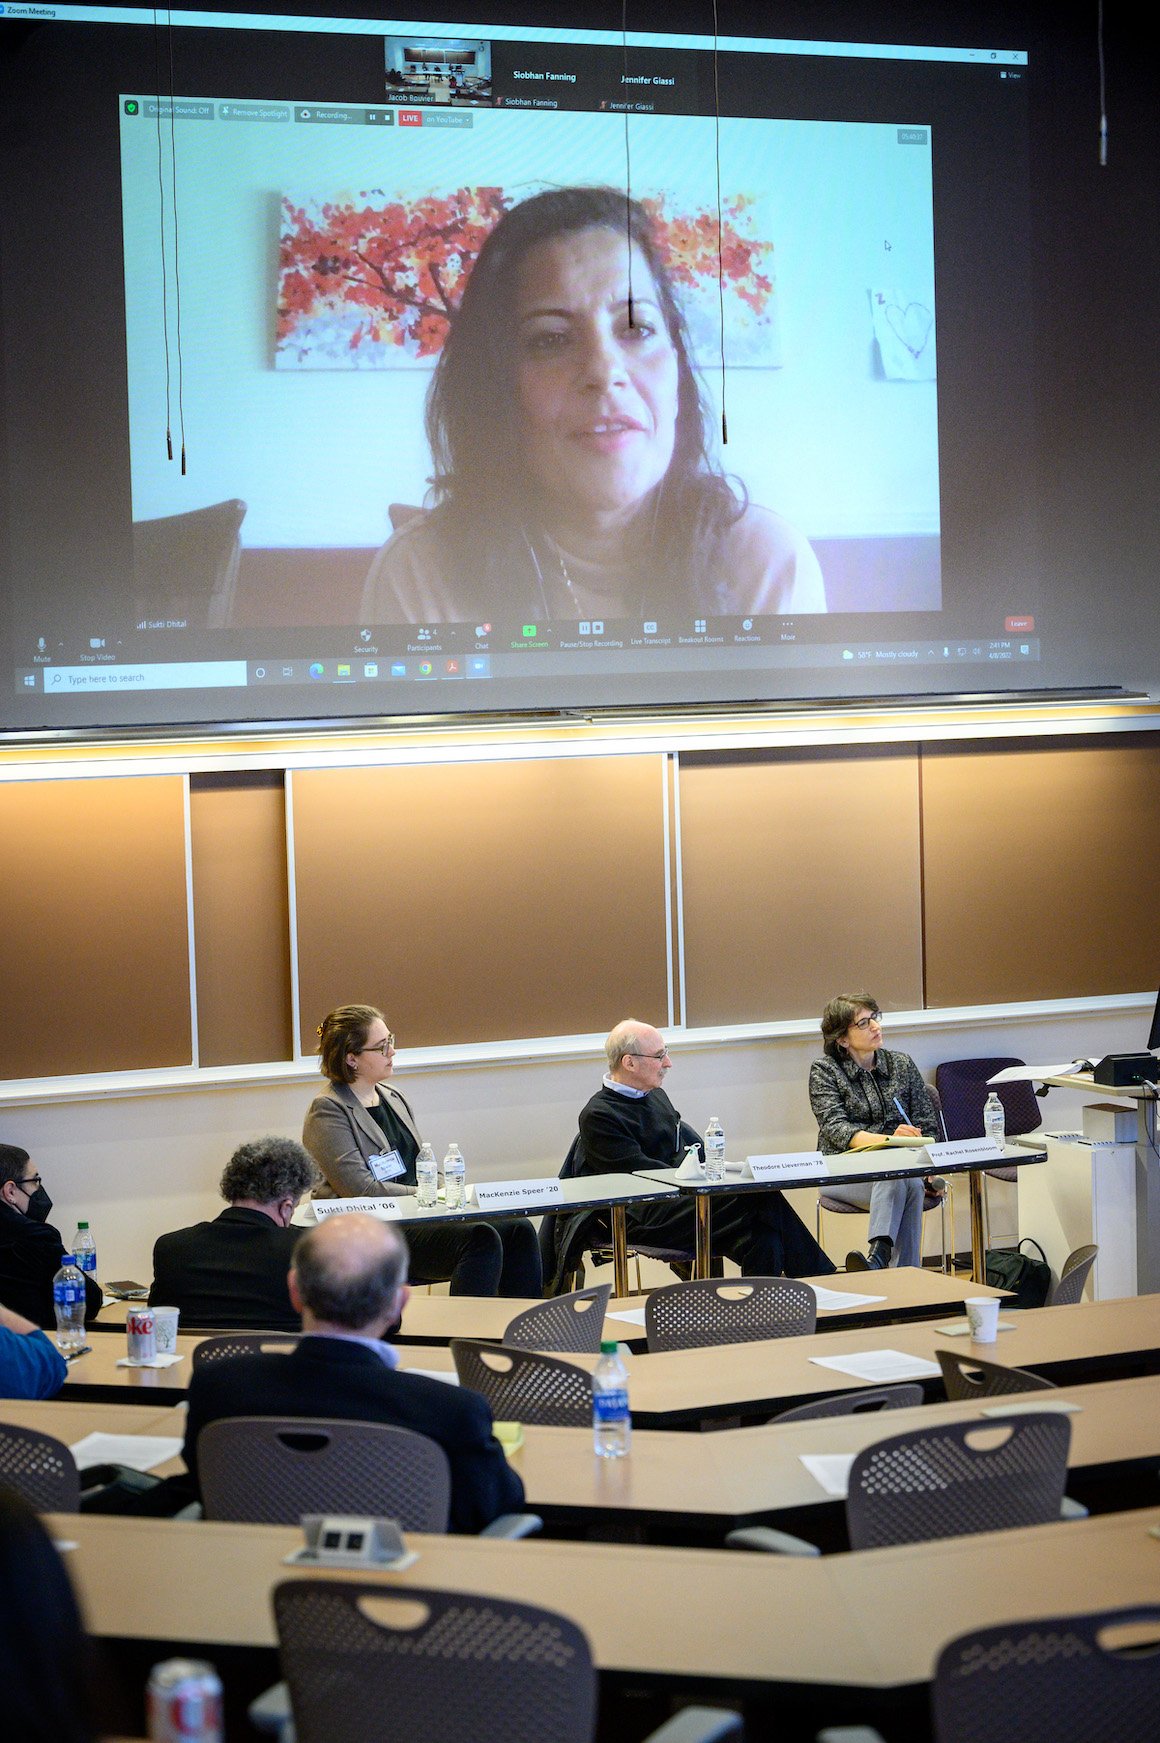 Sukti Dhital ’06, executive director of the Bernstein Institute for Human Rights at NYU School of Law, participated via Zoom in a panel on Teaching as a Tool of Progress